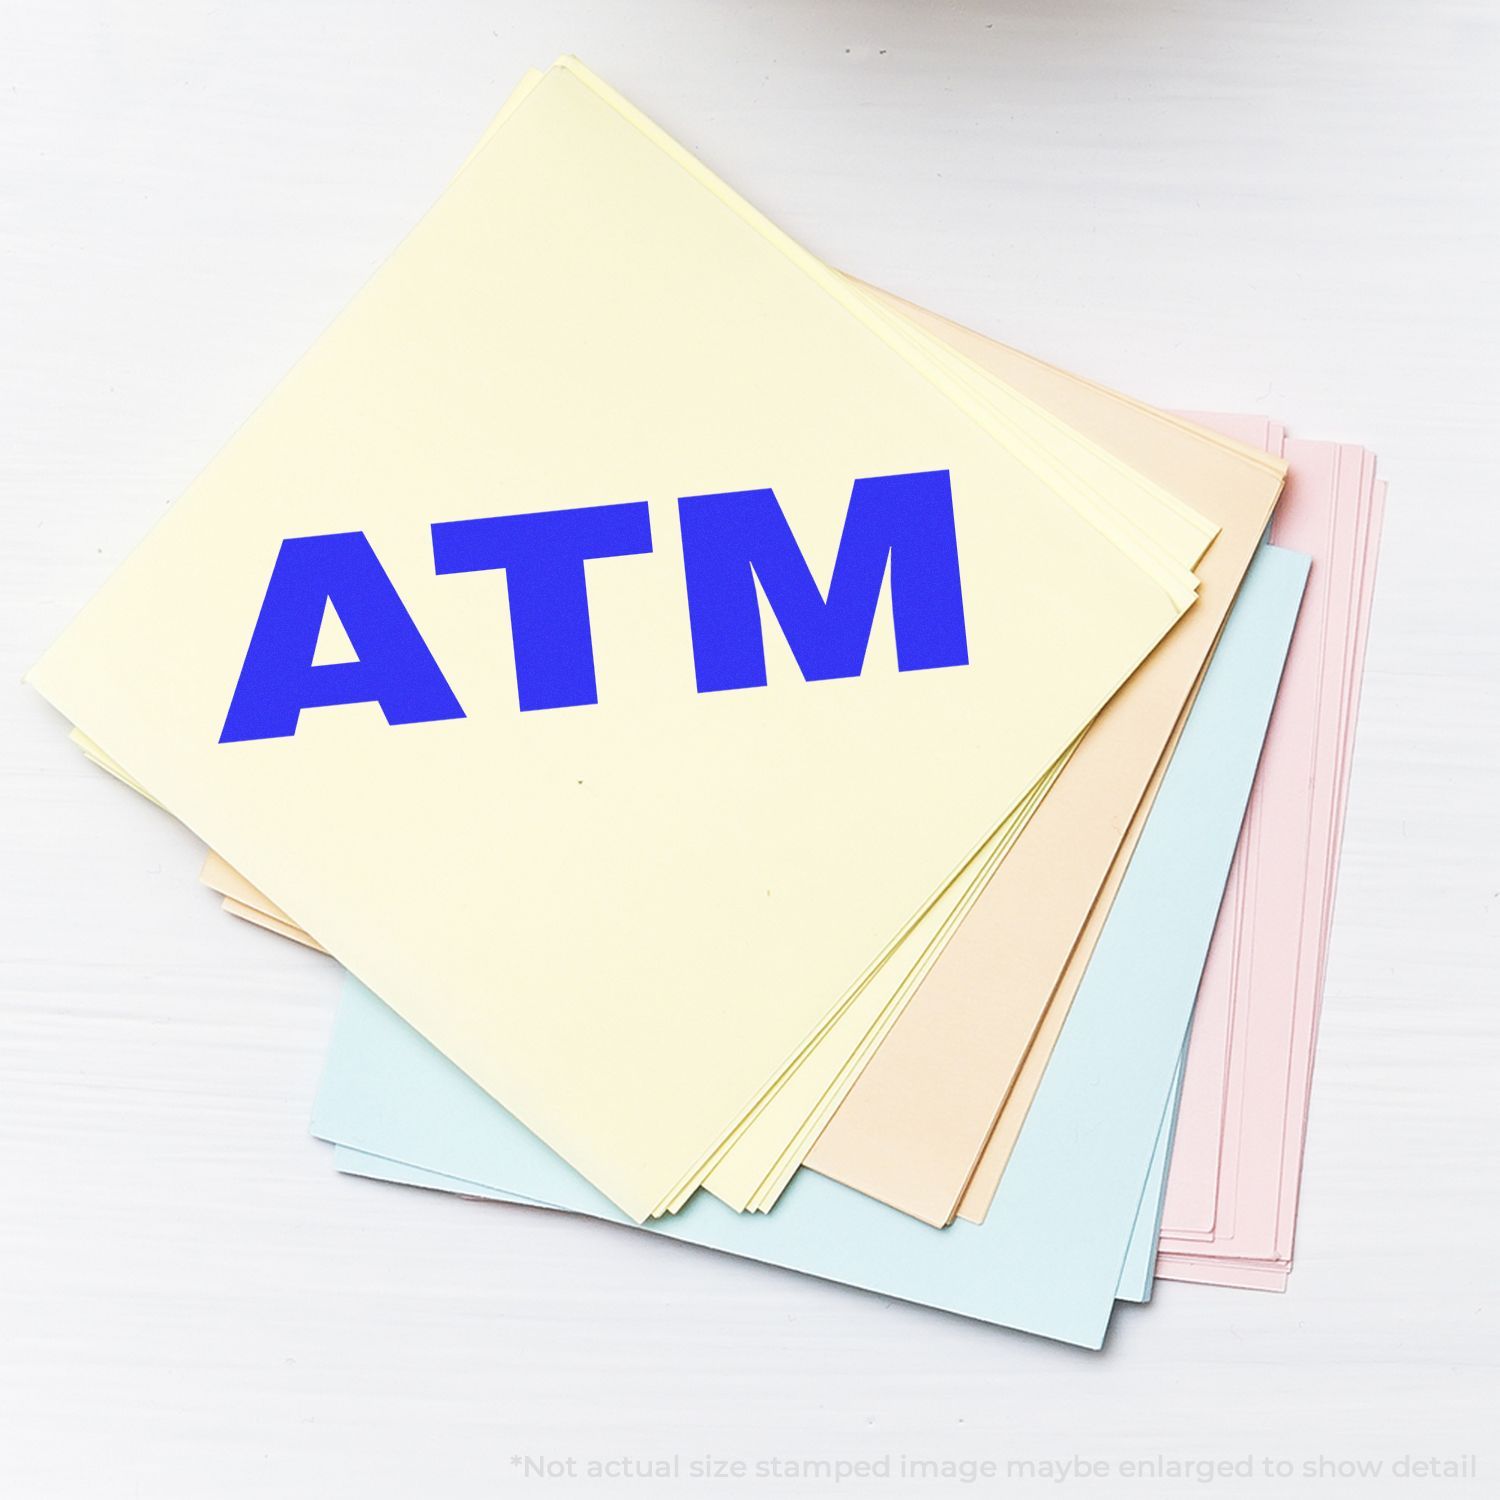 A stock office pre-inked stamp with a stamped image showing how the text "ATM" in a large font is displayed after stamping.